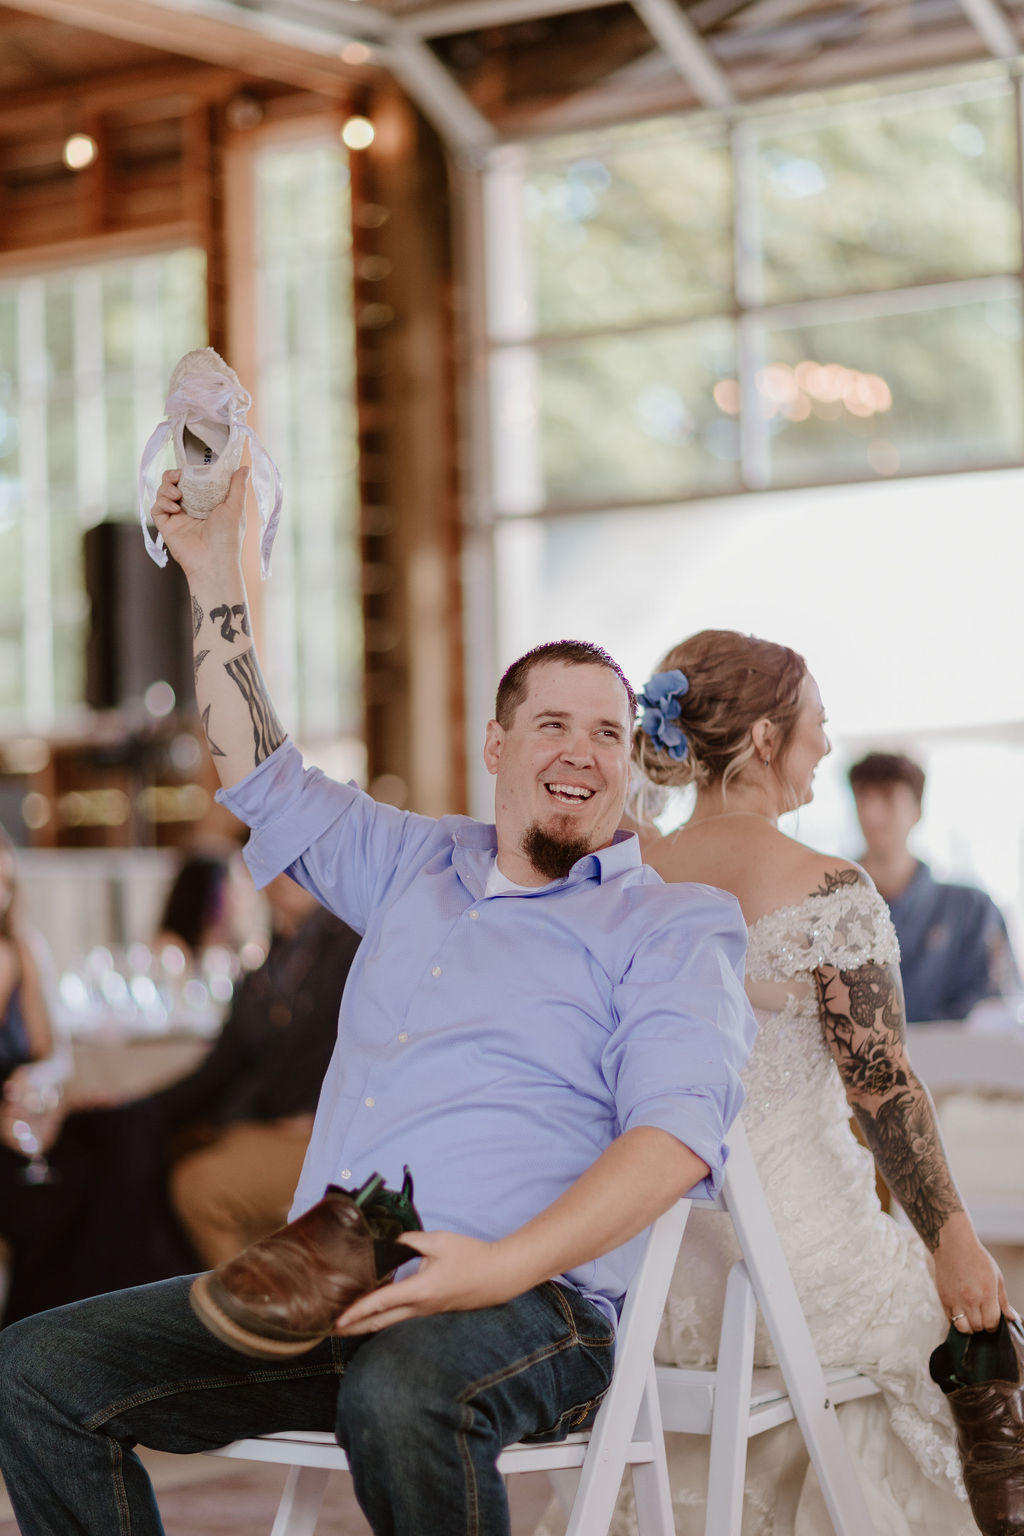 Groom holding up bride's shoe during the wedding shoe game.